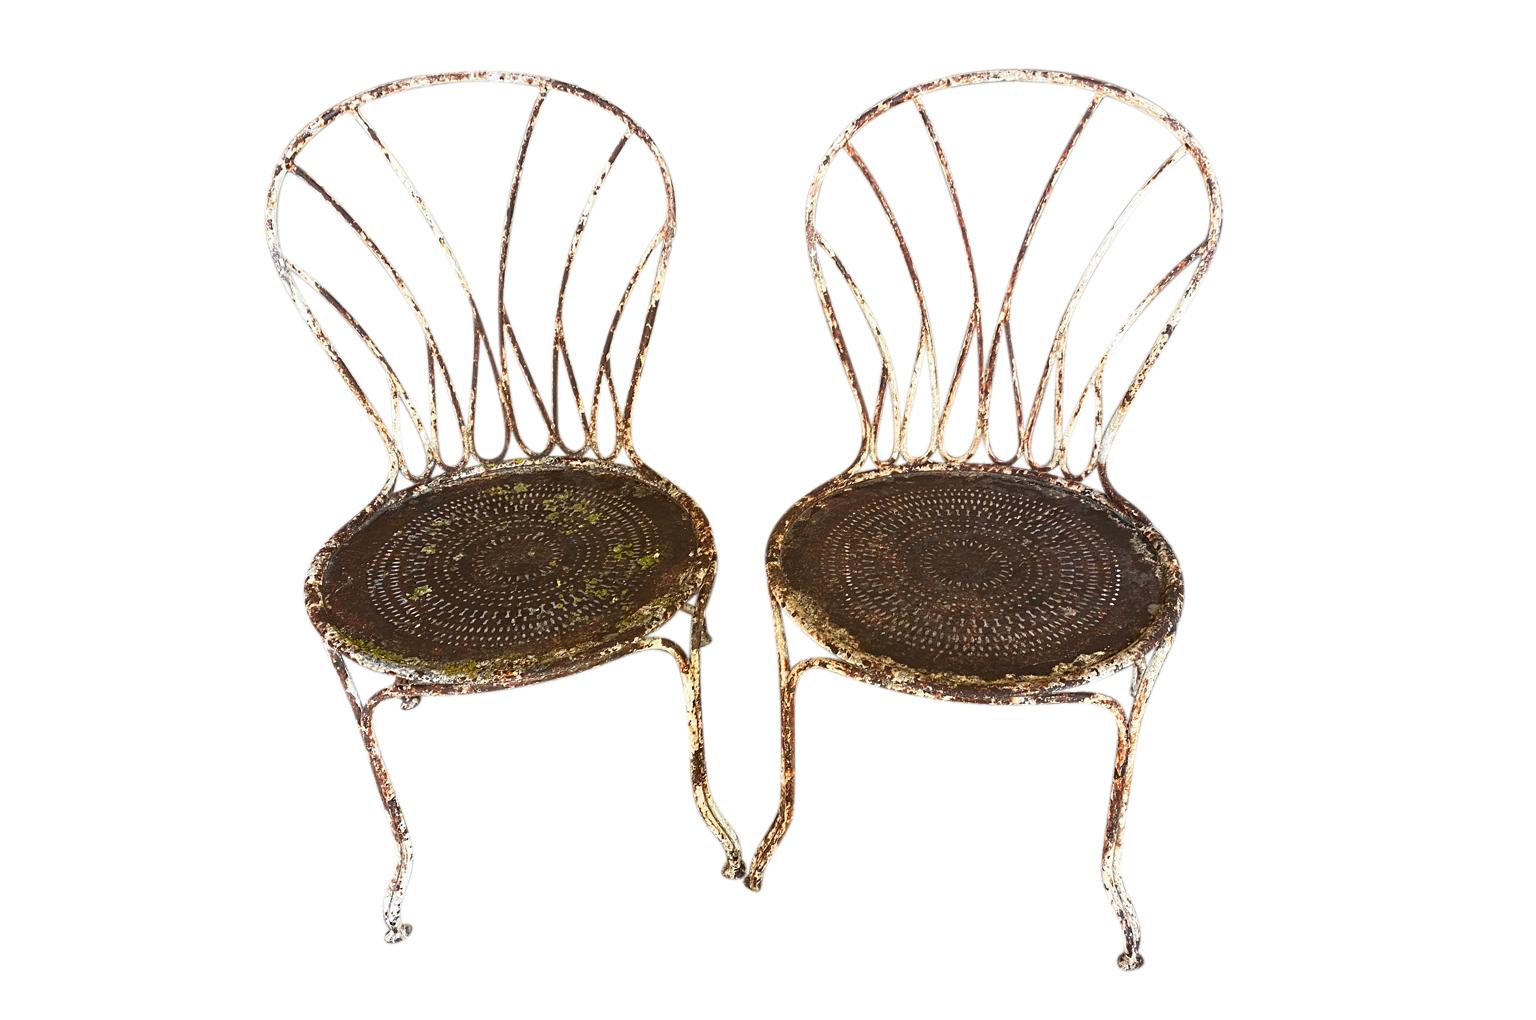 A very lovely pair of later 19th century Garden chairs from the Provence region of France. Soundly constructed from painted iron. Perfect for the interior or garden. The seat height is 16